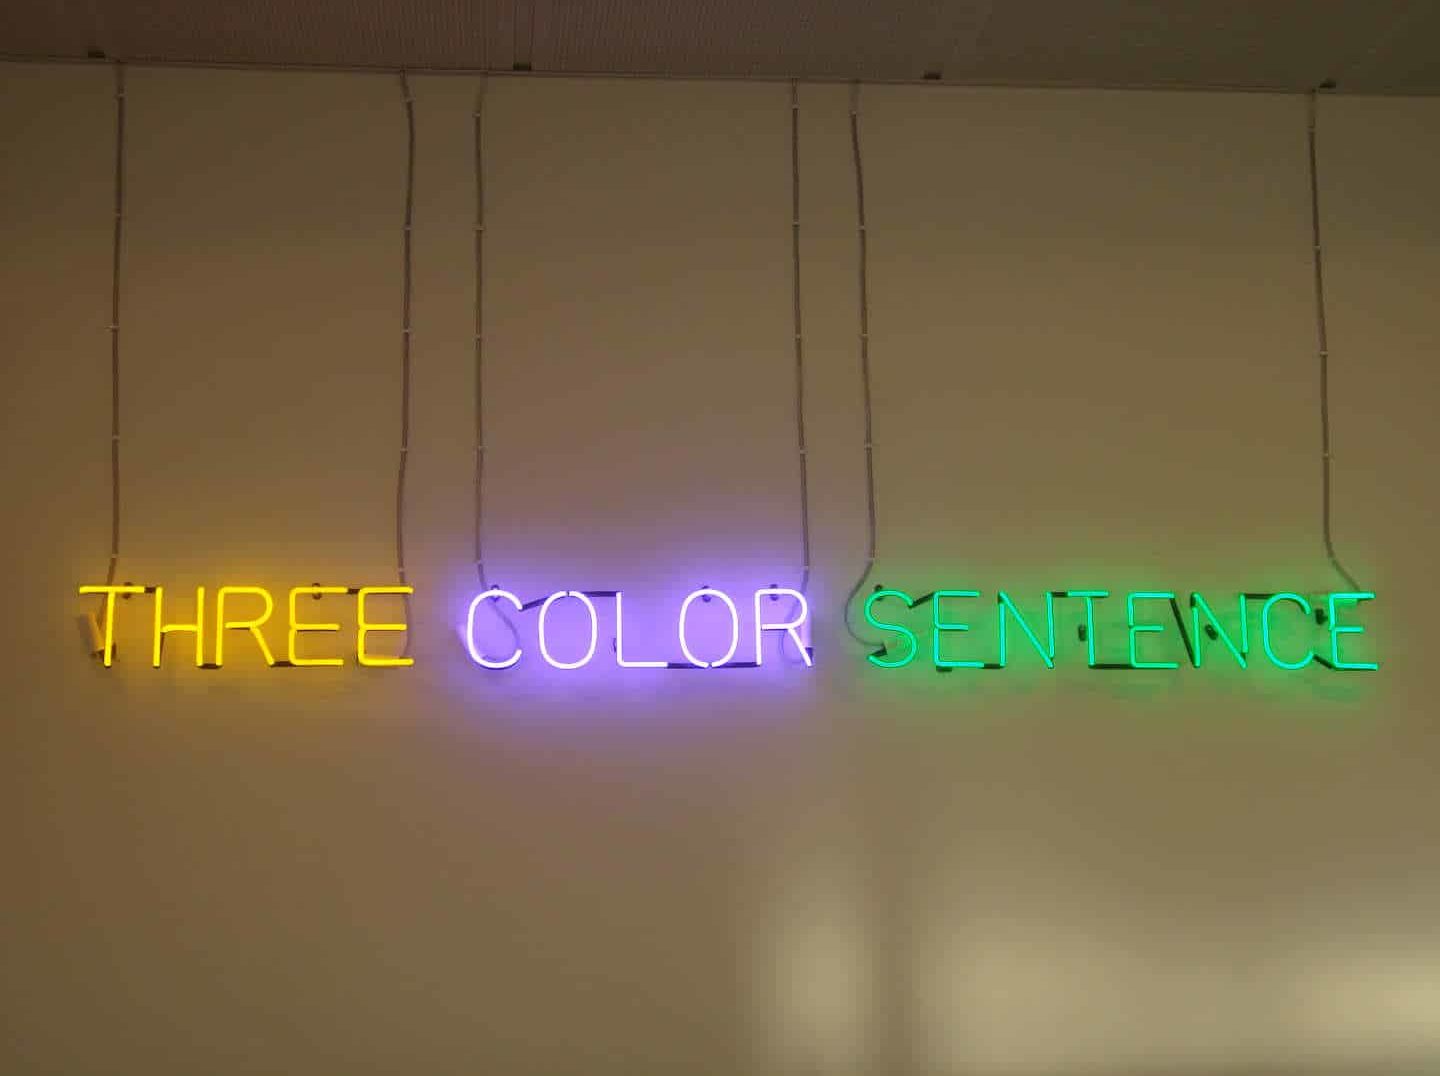 “Three color sentence” by David J is licensed under CC BY 2.0